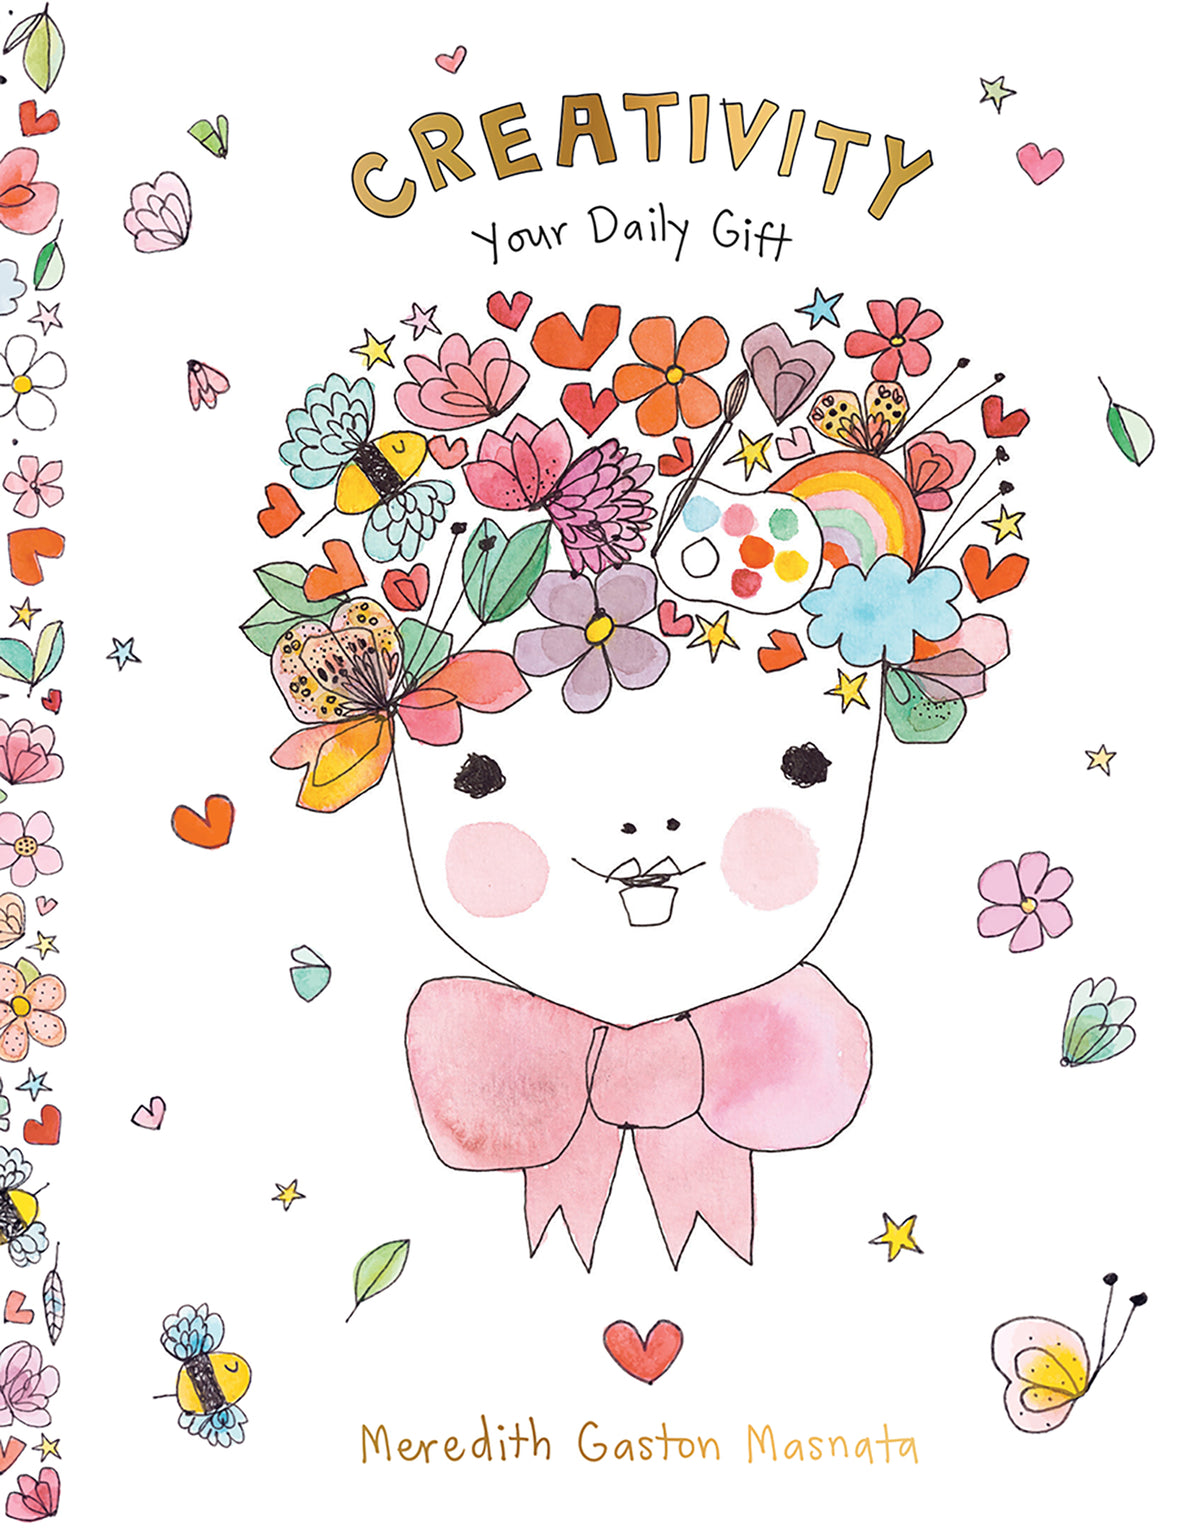 Creativity - Your Daily Gift | Meredith Gaston